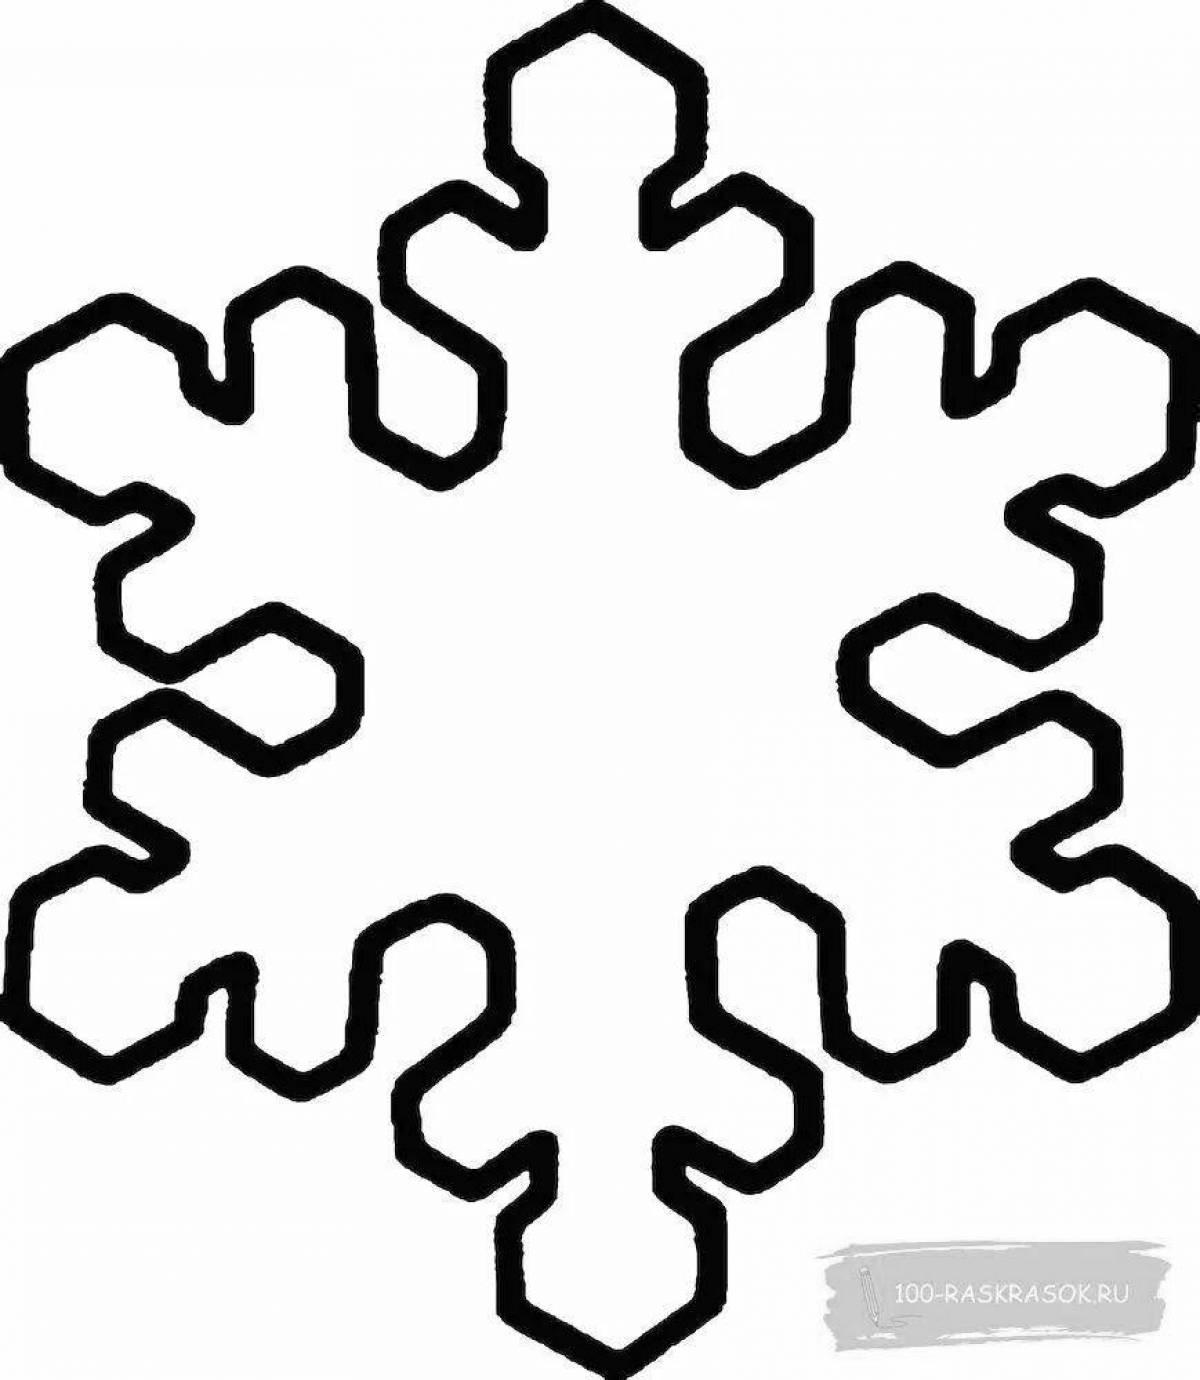 Exquisite snowflake coloring book for 4-5 year olds